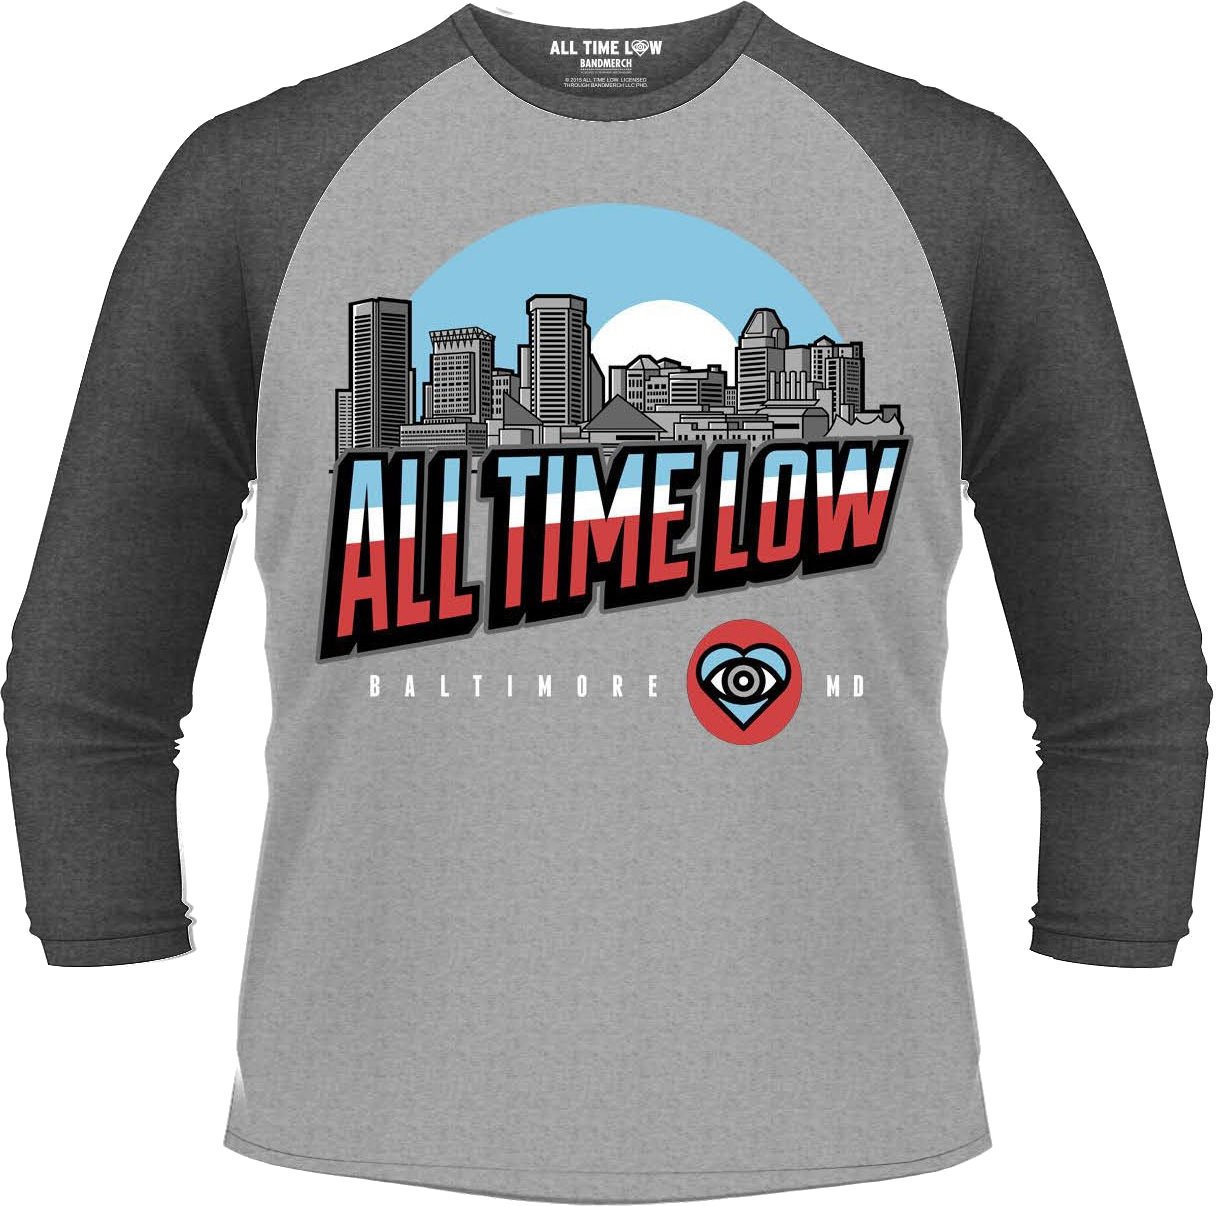 T-Shirt All Time Low T-Shirt Baltimore Male Grey XL